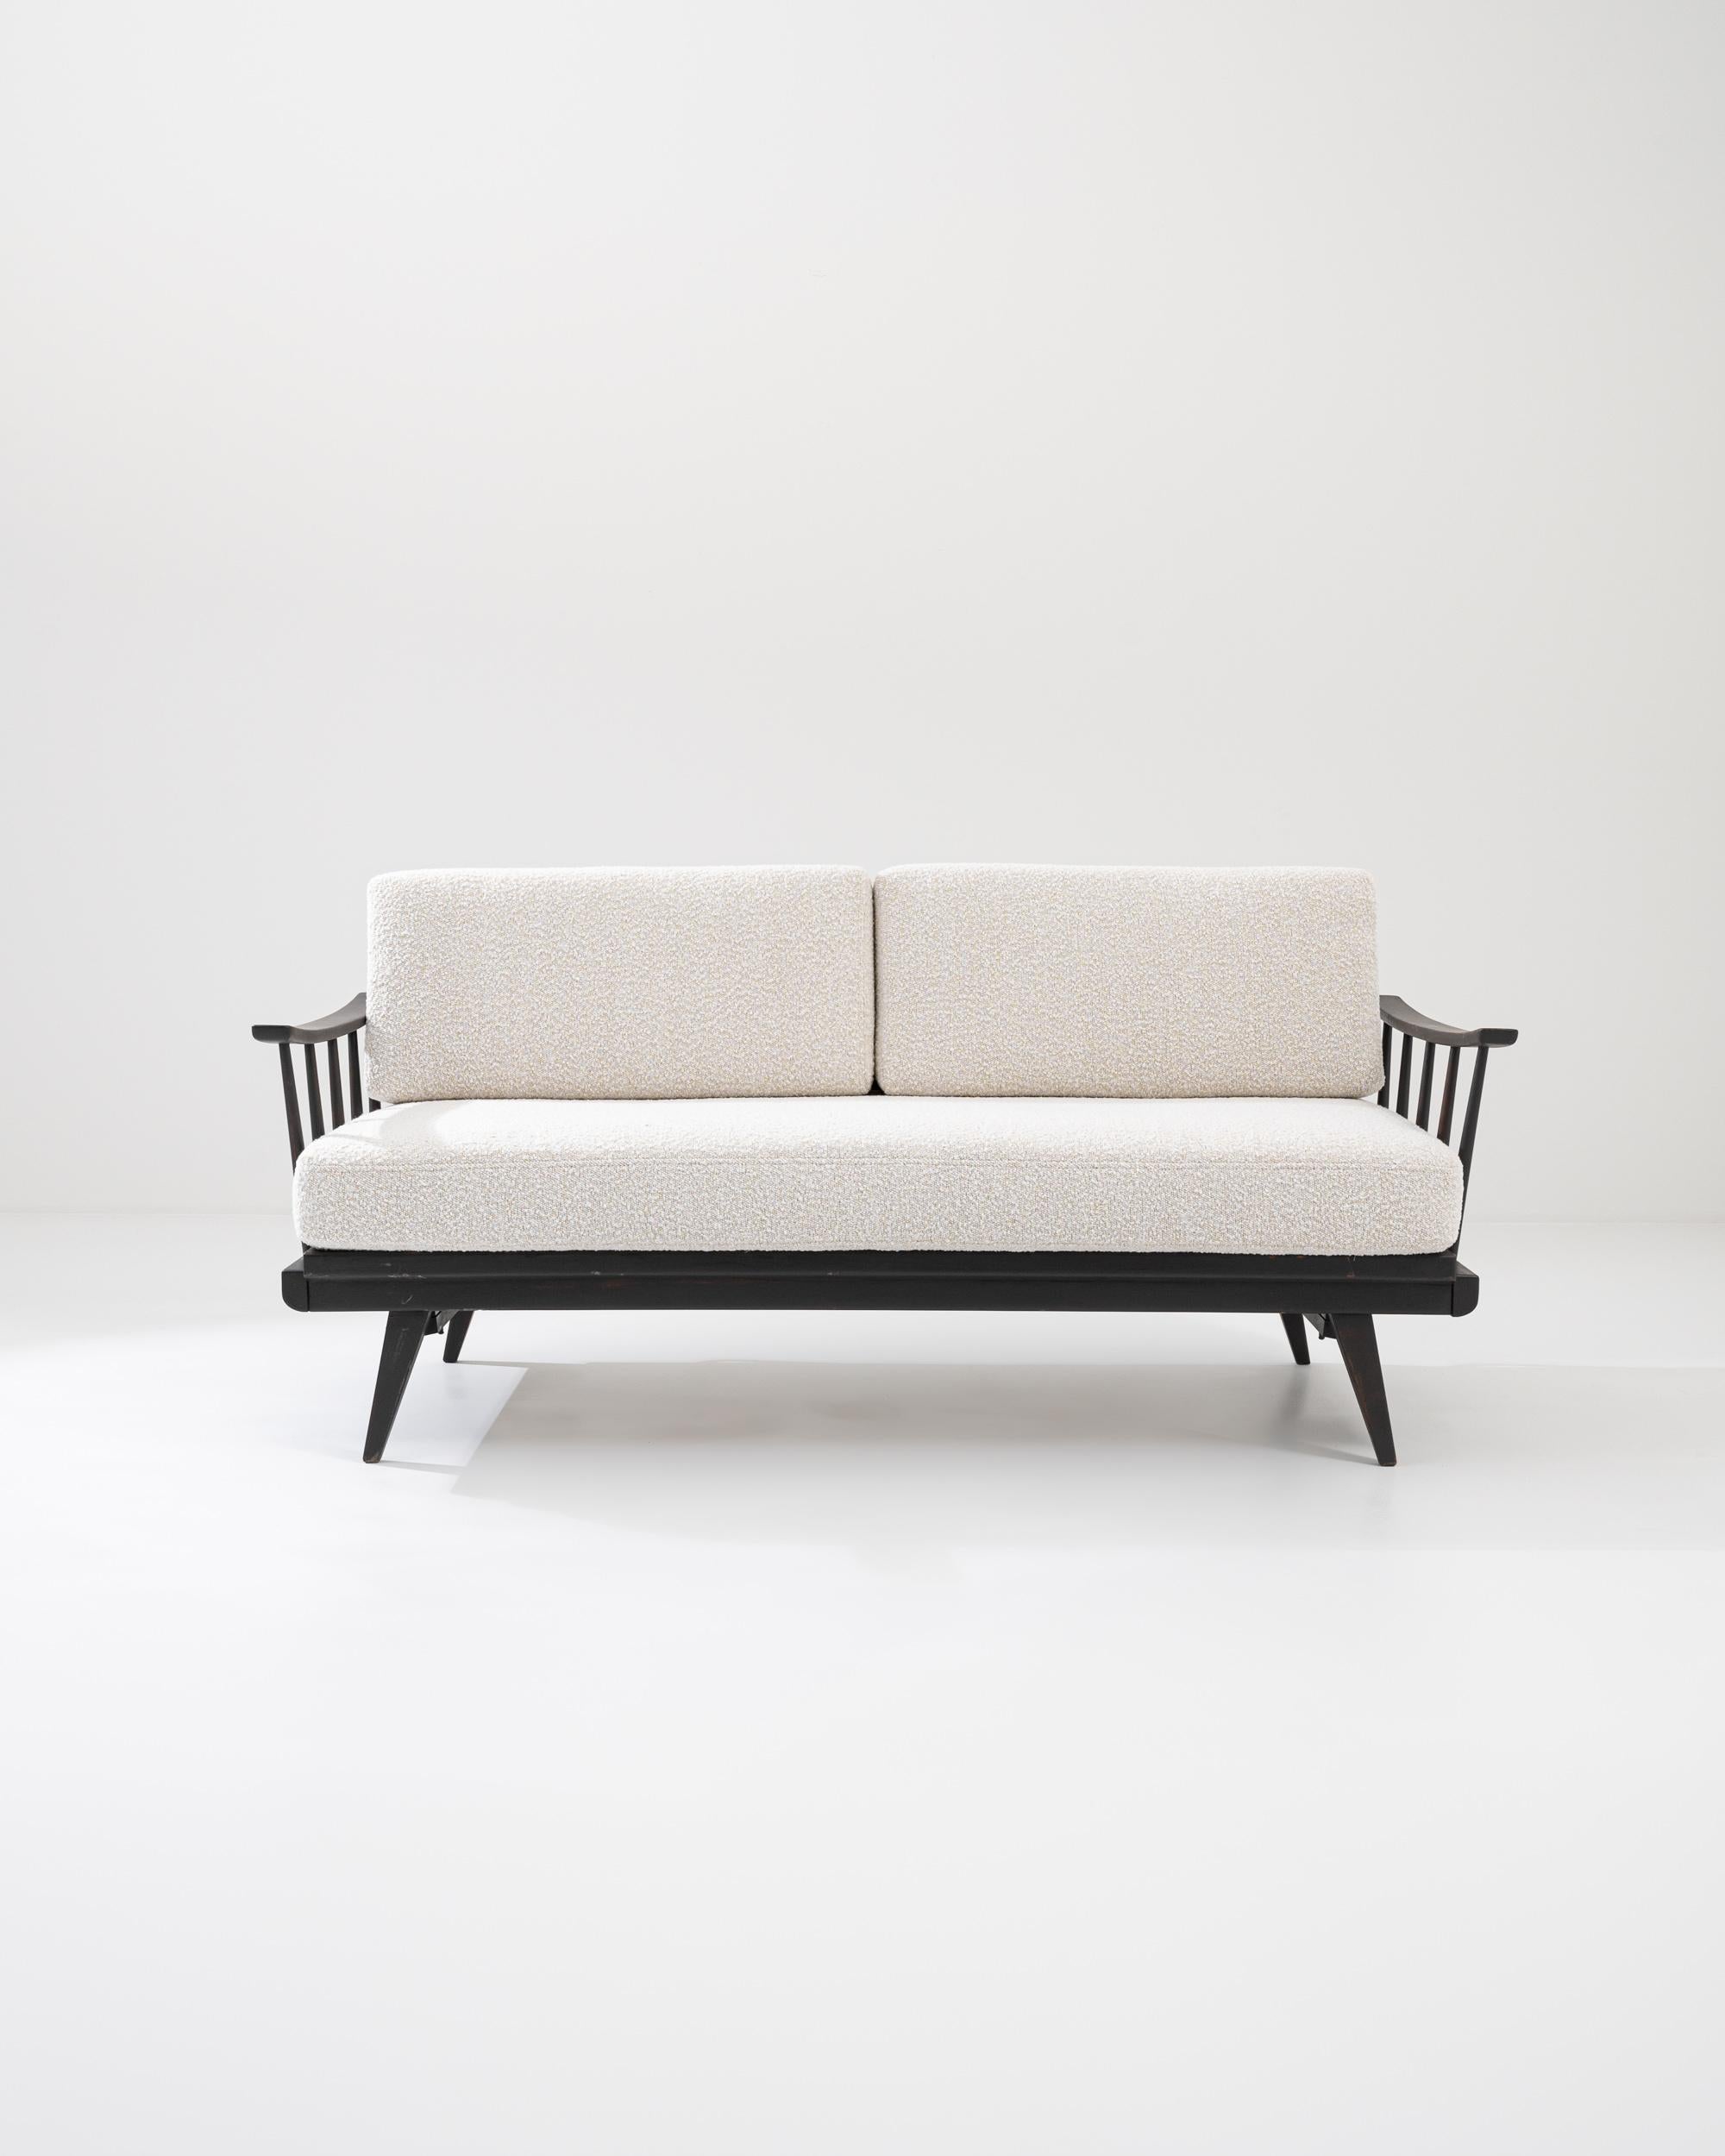 This wooden upholstered sofa was produced in Czechia, circa 1960. An elegant sofa elevated upon splayed tapered feet, refurbished with a soft boucle upholstery in a powder tone. The plump cushions ensure a relaxed posture, while the original wooden